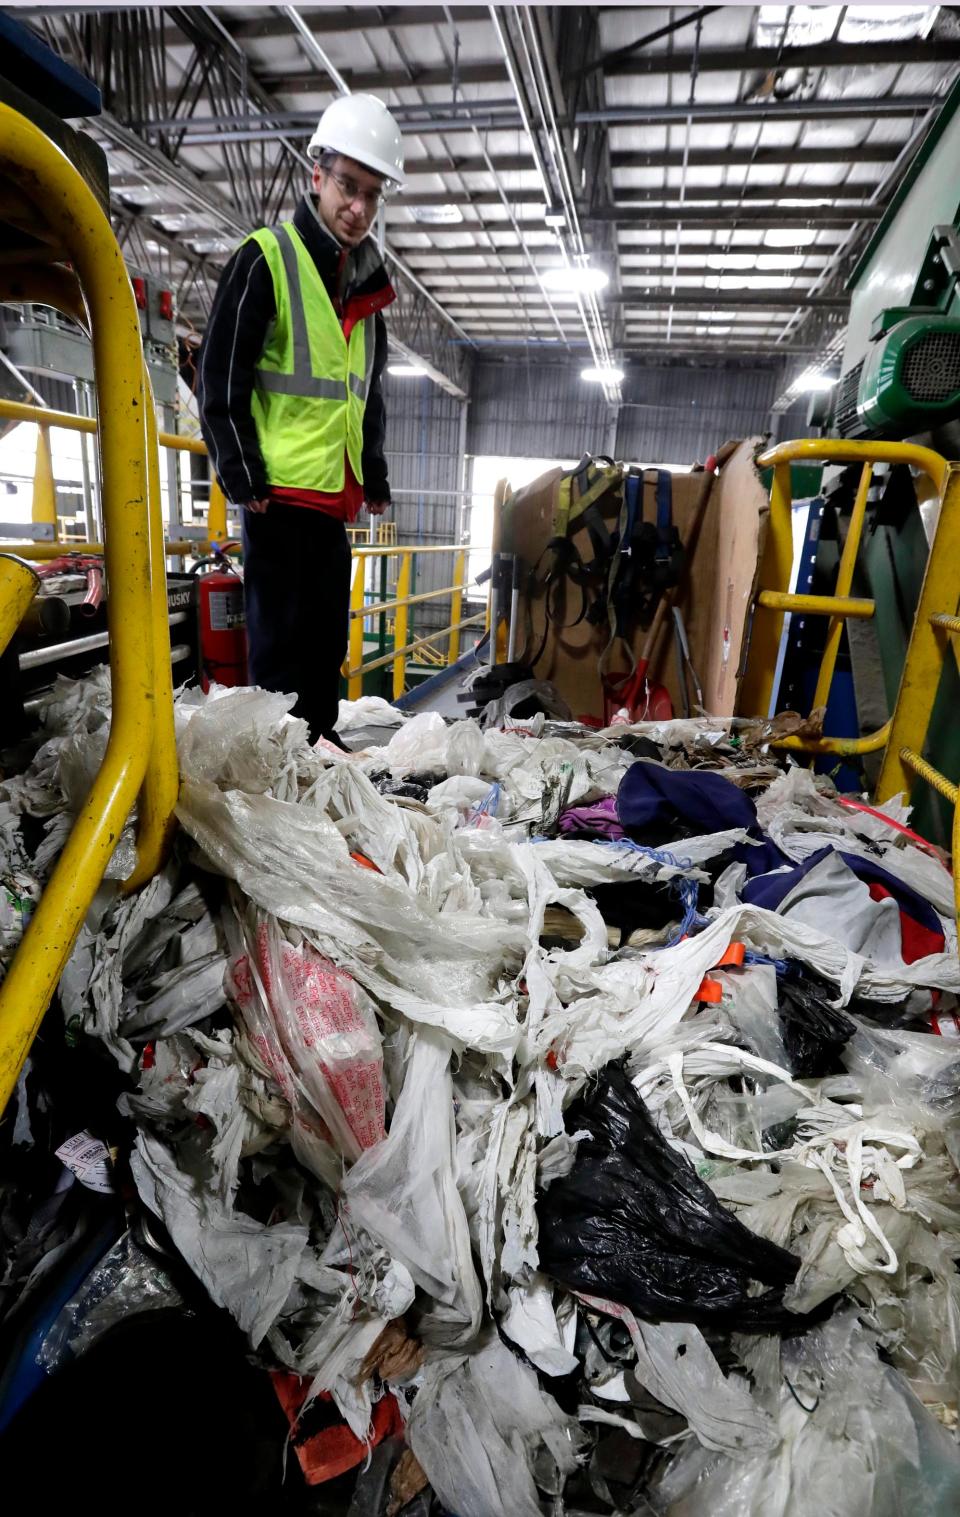 Rick Meyers, sanitation services manager at the recycling center jointly owned by the City of Milwaukee and 27 communities in Waukesha County, shows the plastic bags that were cut from the sorting machines. A conveyor lifts paper products onto spinning disks that sort and compact. Residents often put plastic bags into their recycling bins, which binds up the disks and have to be cut away manually, taking much time away from the sorting process. Recyclable items should be placed loosely in bins, not bagged.